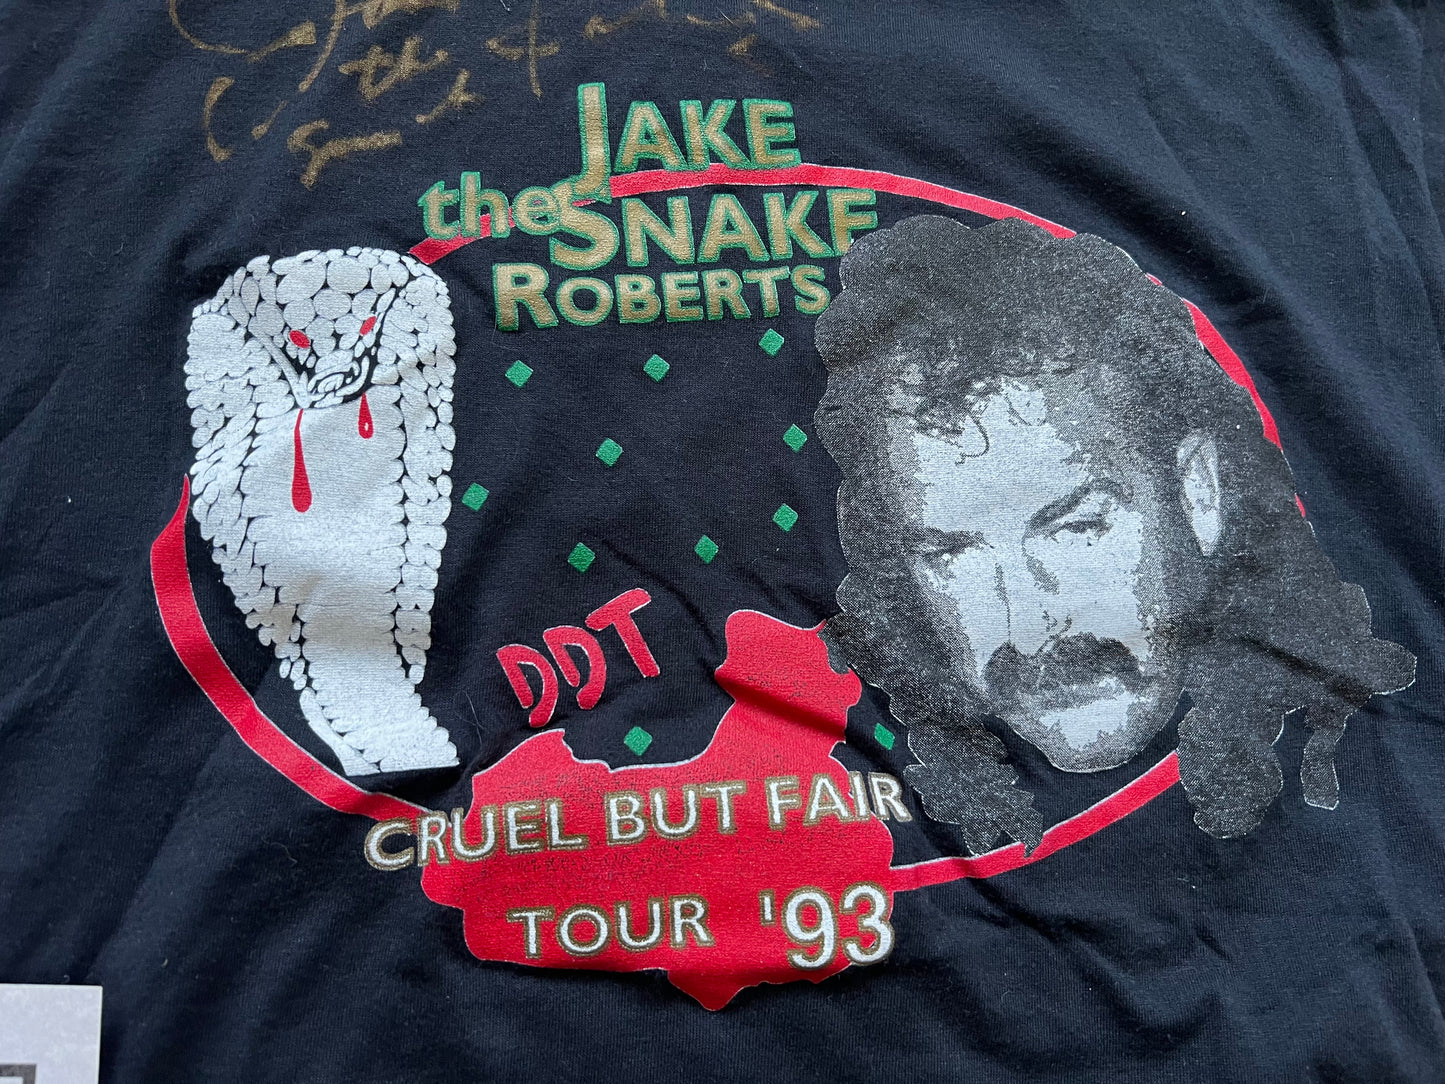 1993 Jake “The Snake” Roberts “Cruel But Fair” tour shirt signed by Jake and includes COA